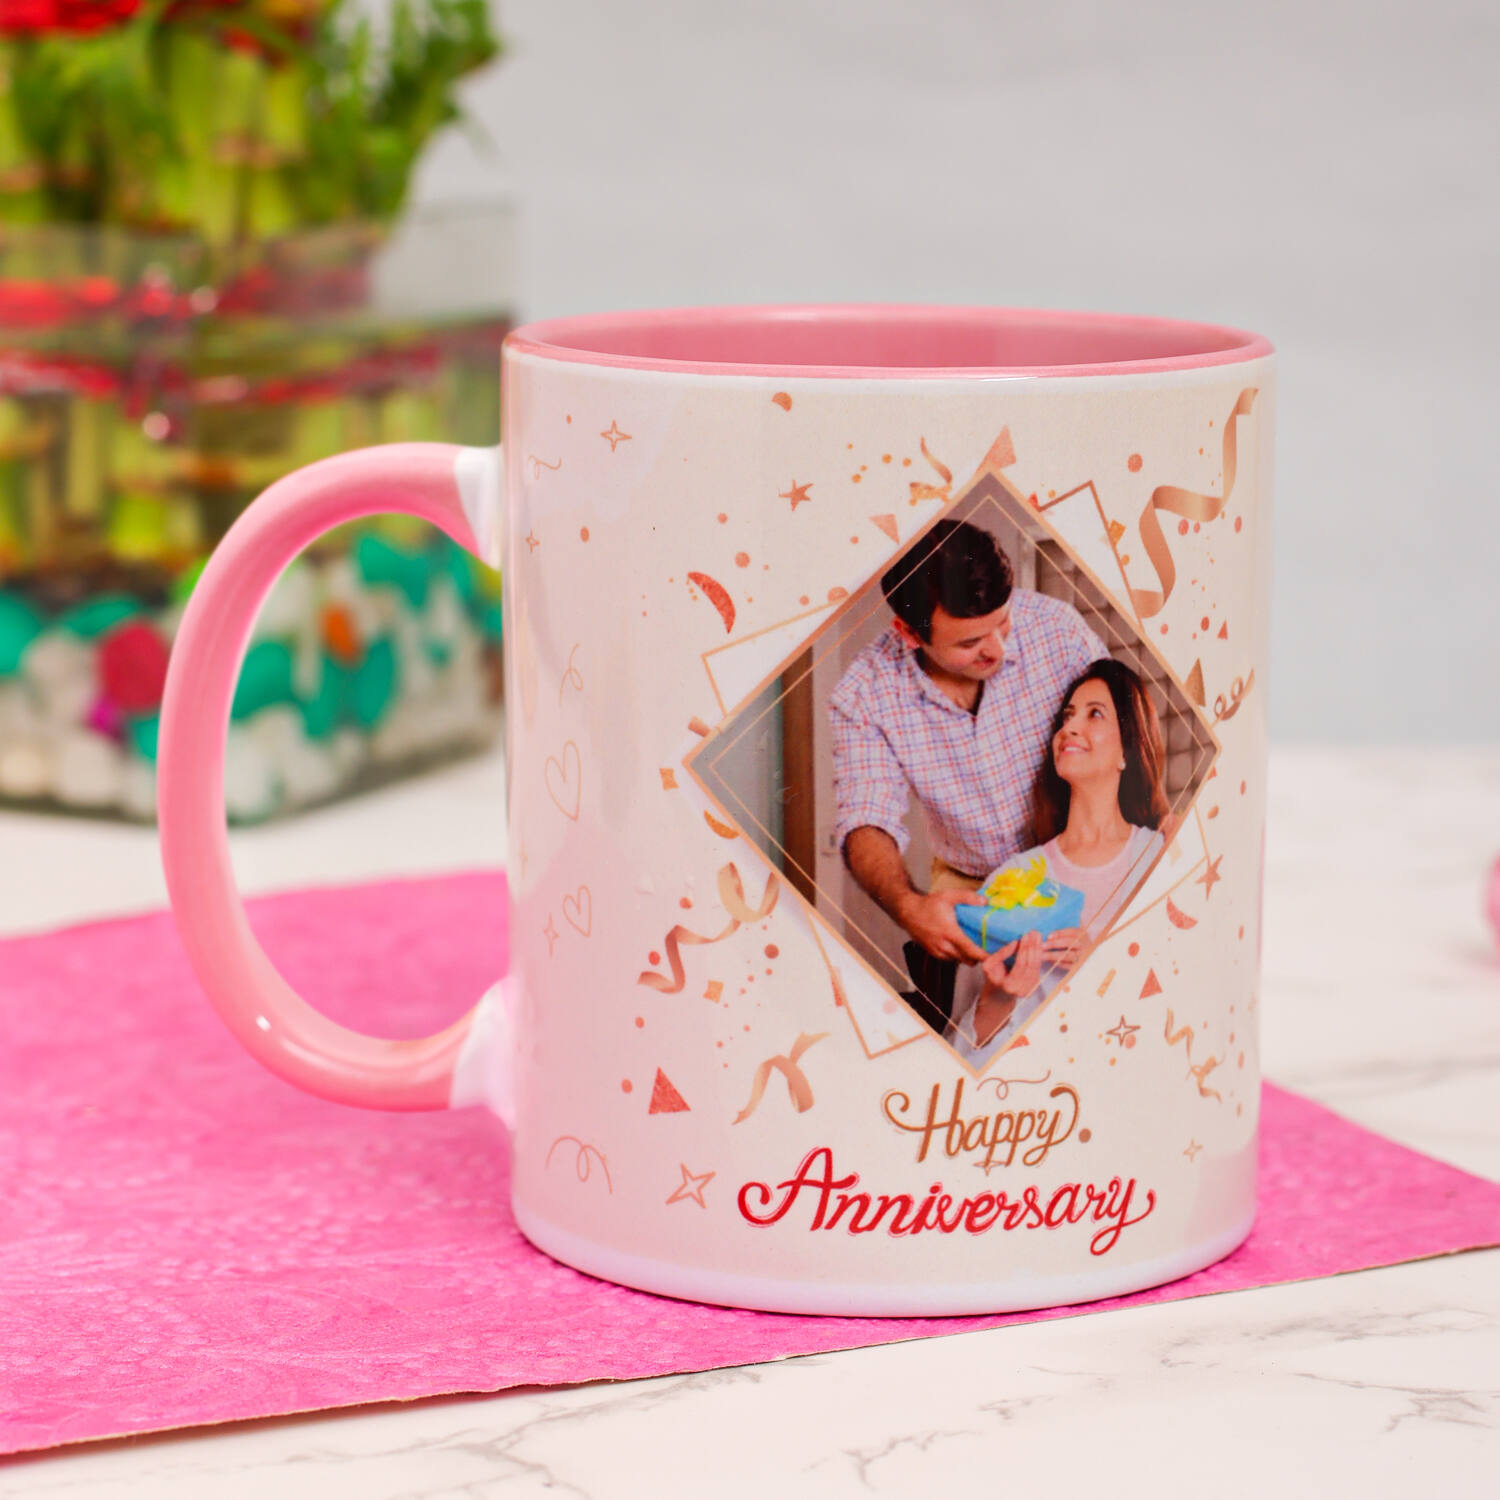 50 Unique Anniversary Gifts for Him 2022  The Dating Divas